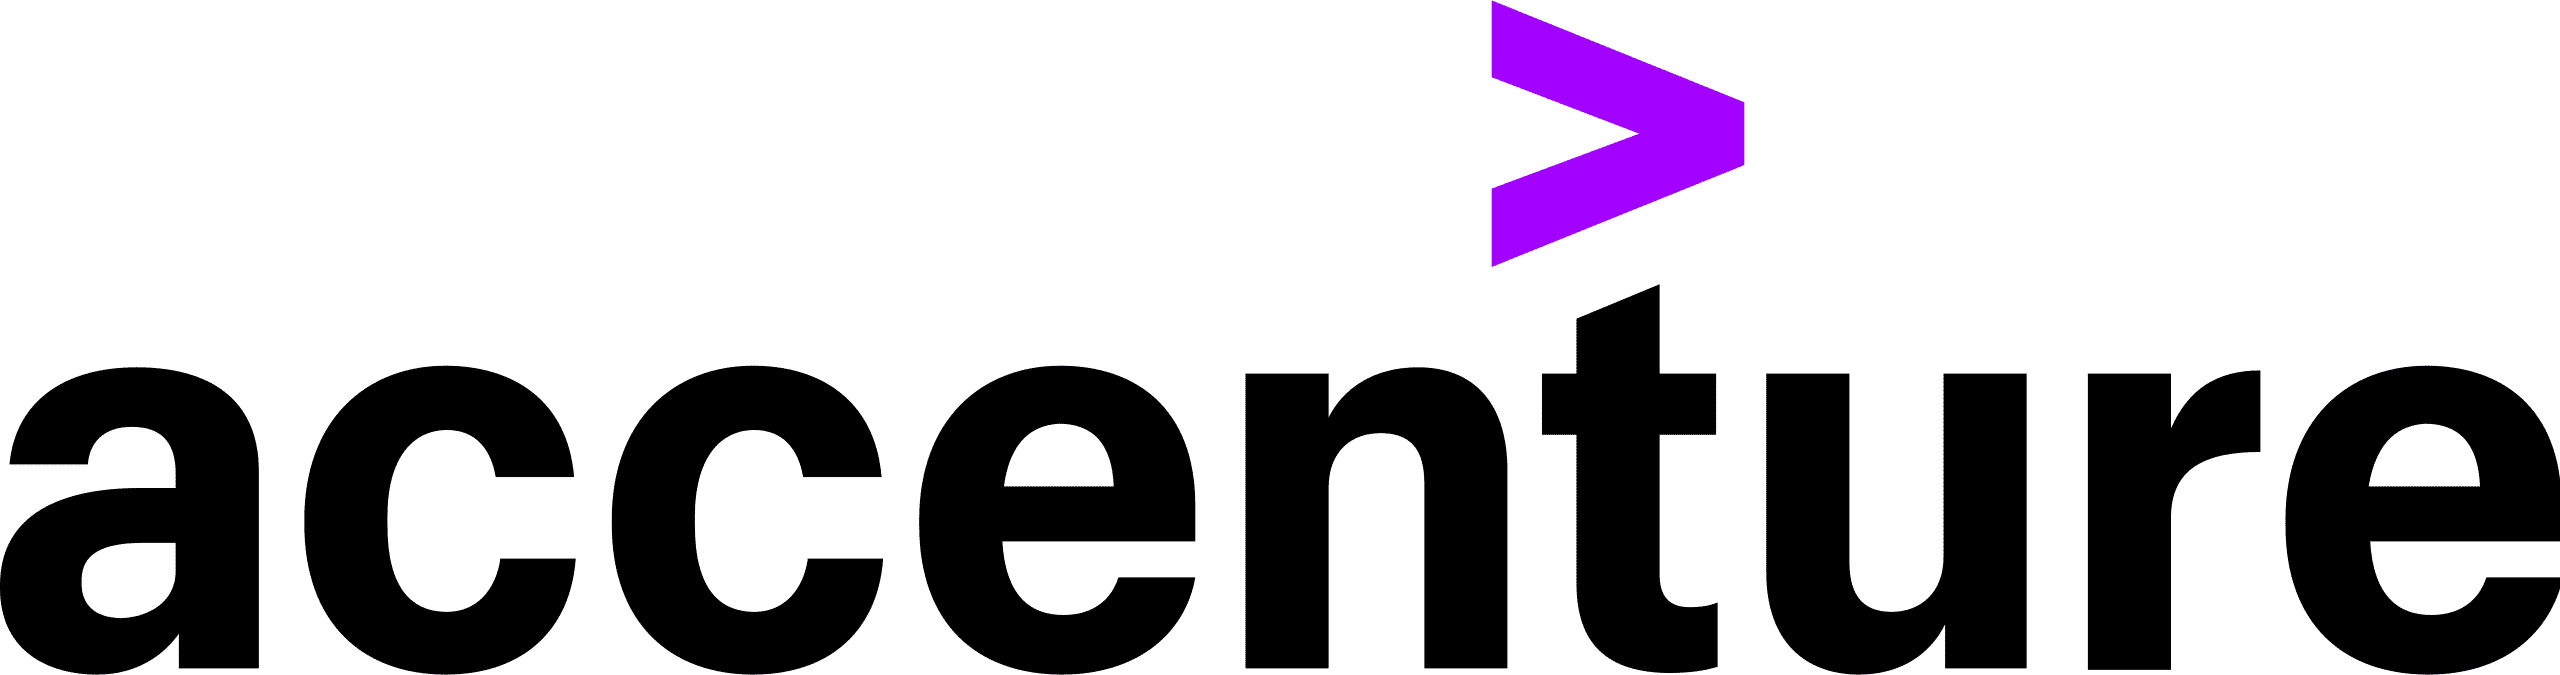 The logo for Accenture